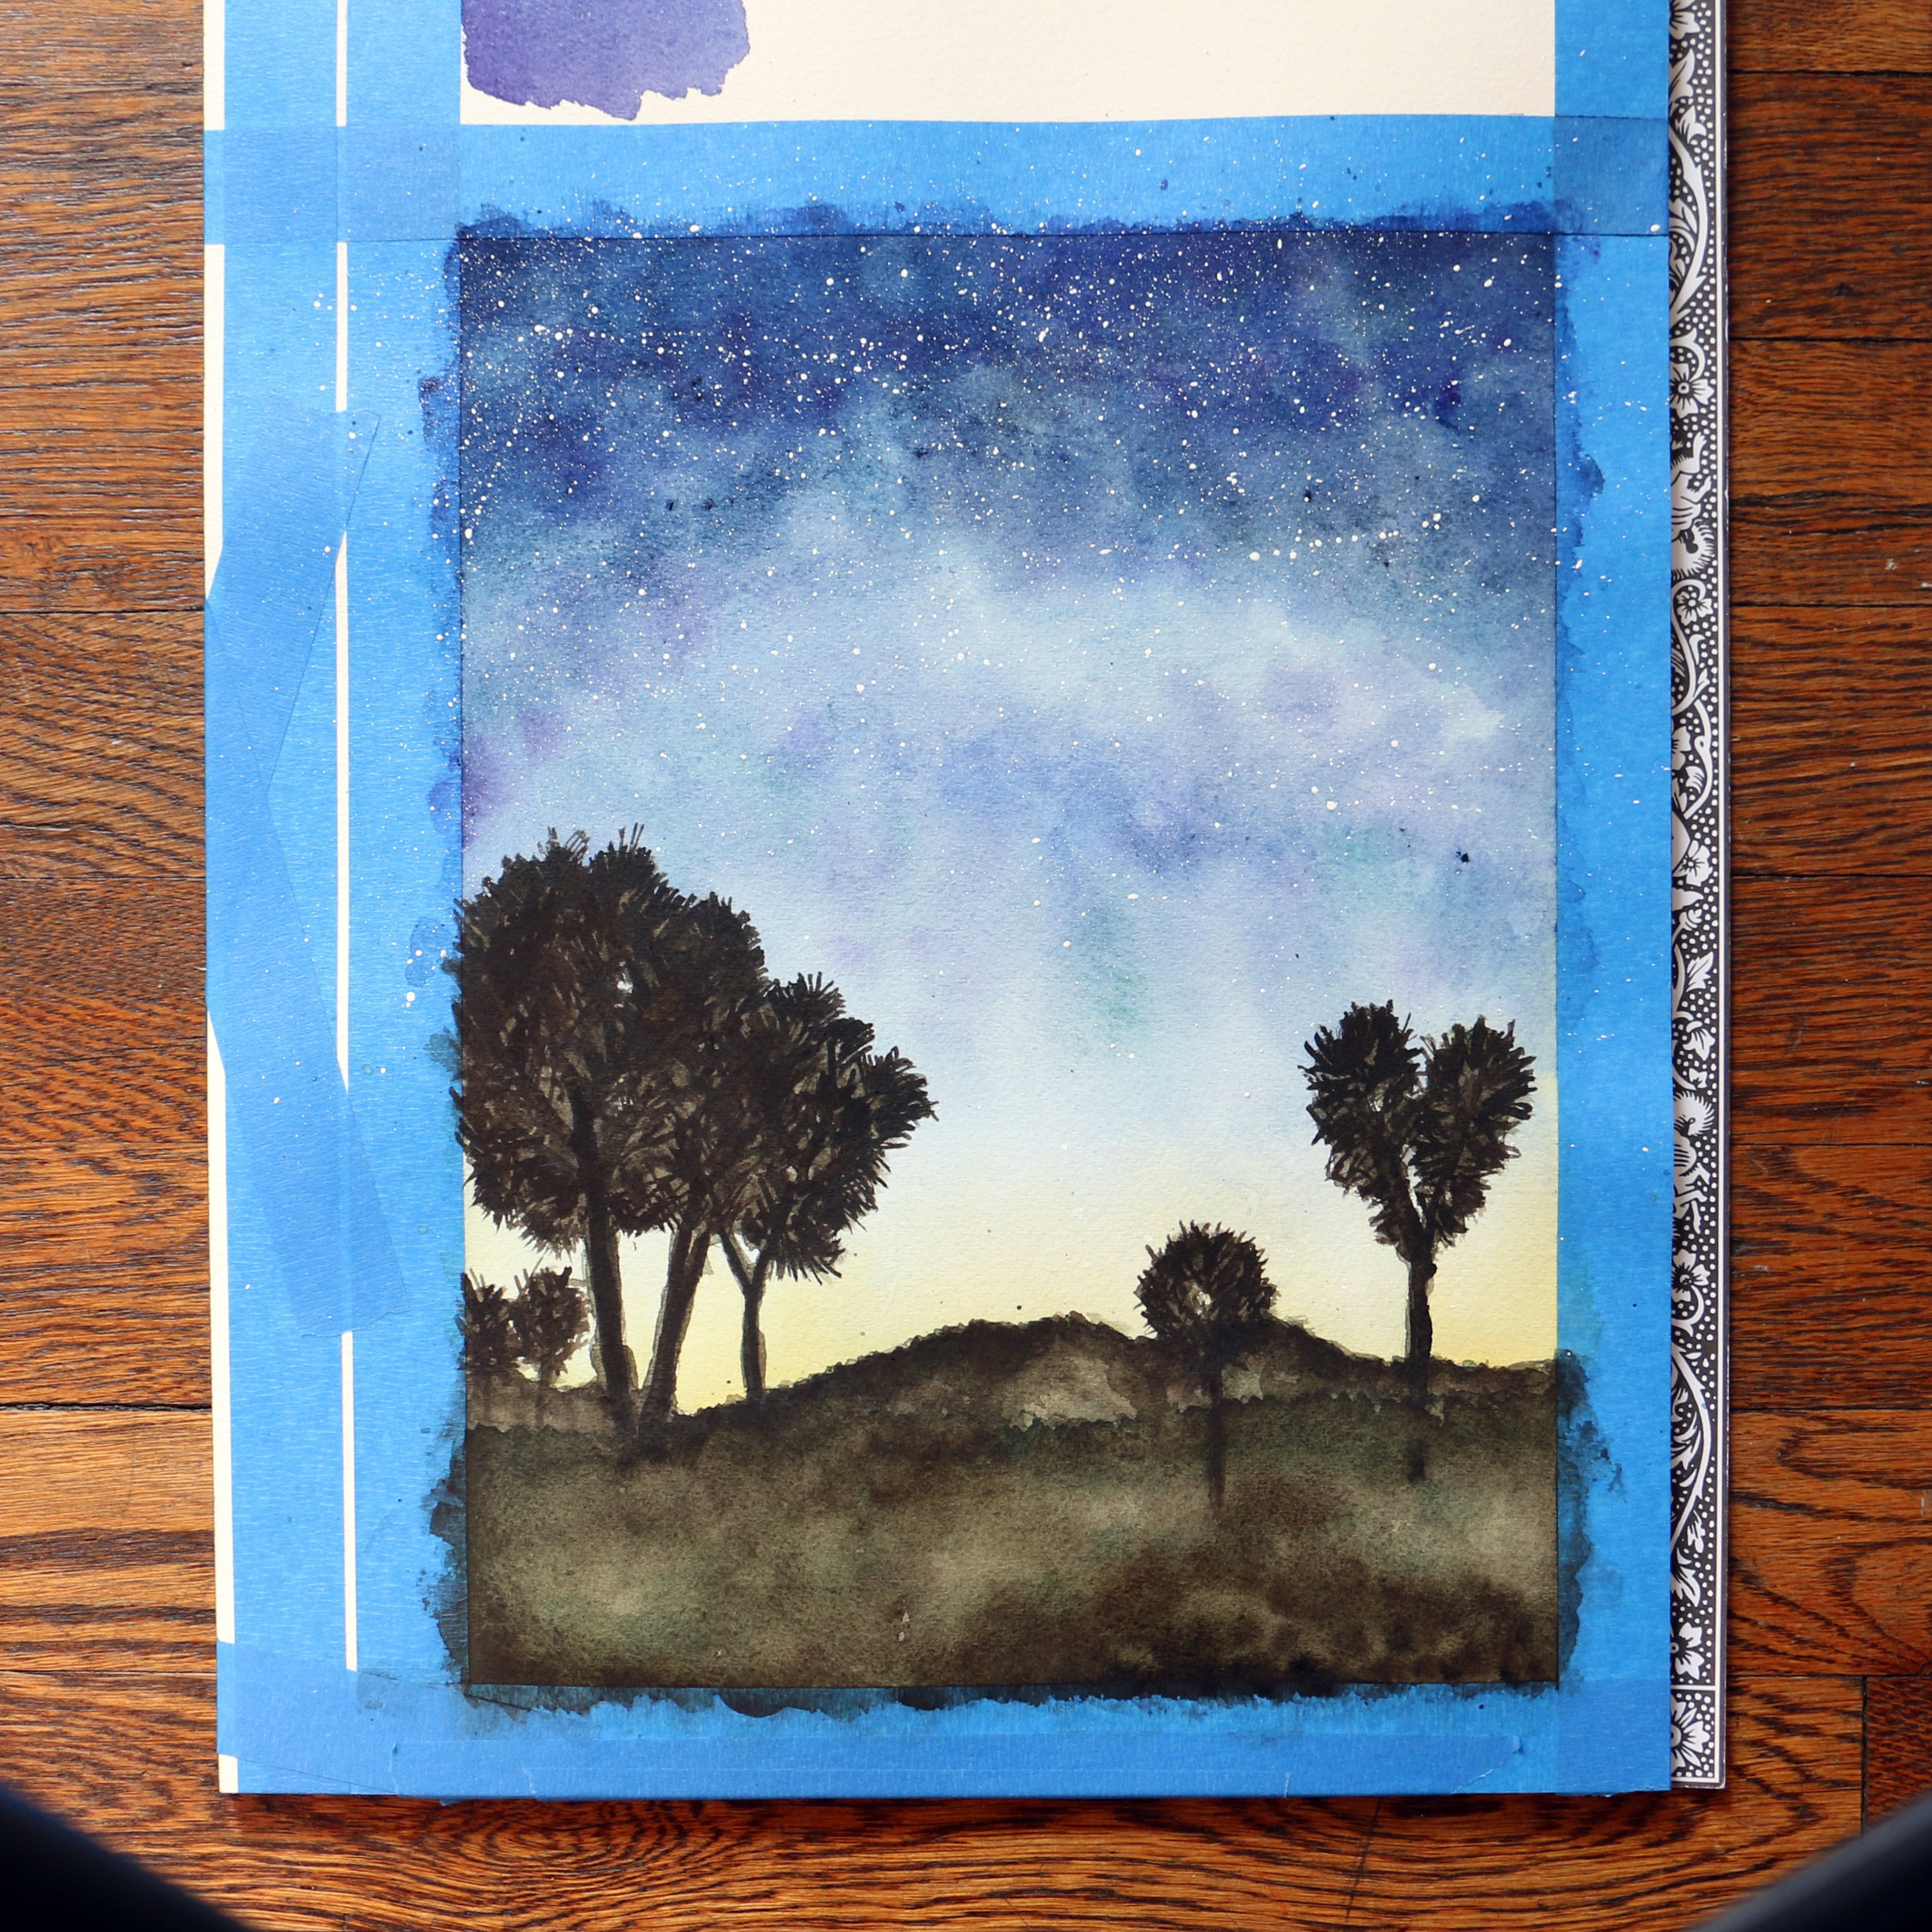  Step 3: Paint the foreground trees and landscape.  